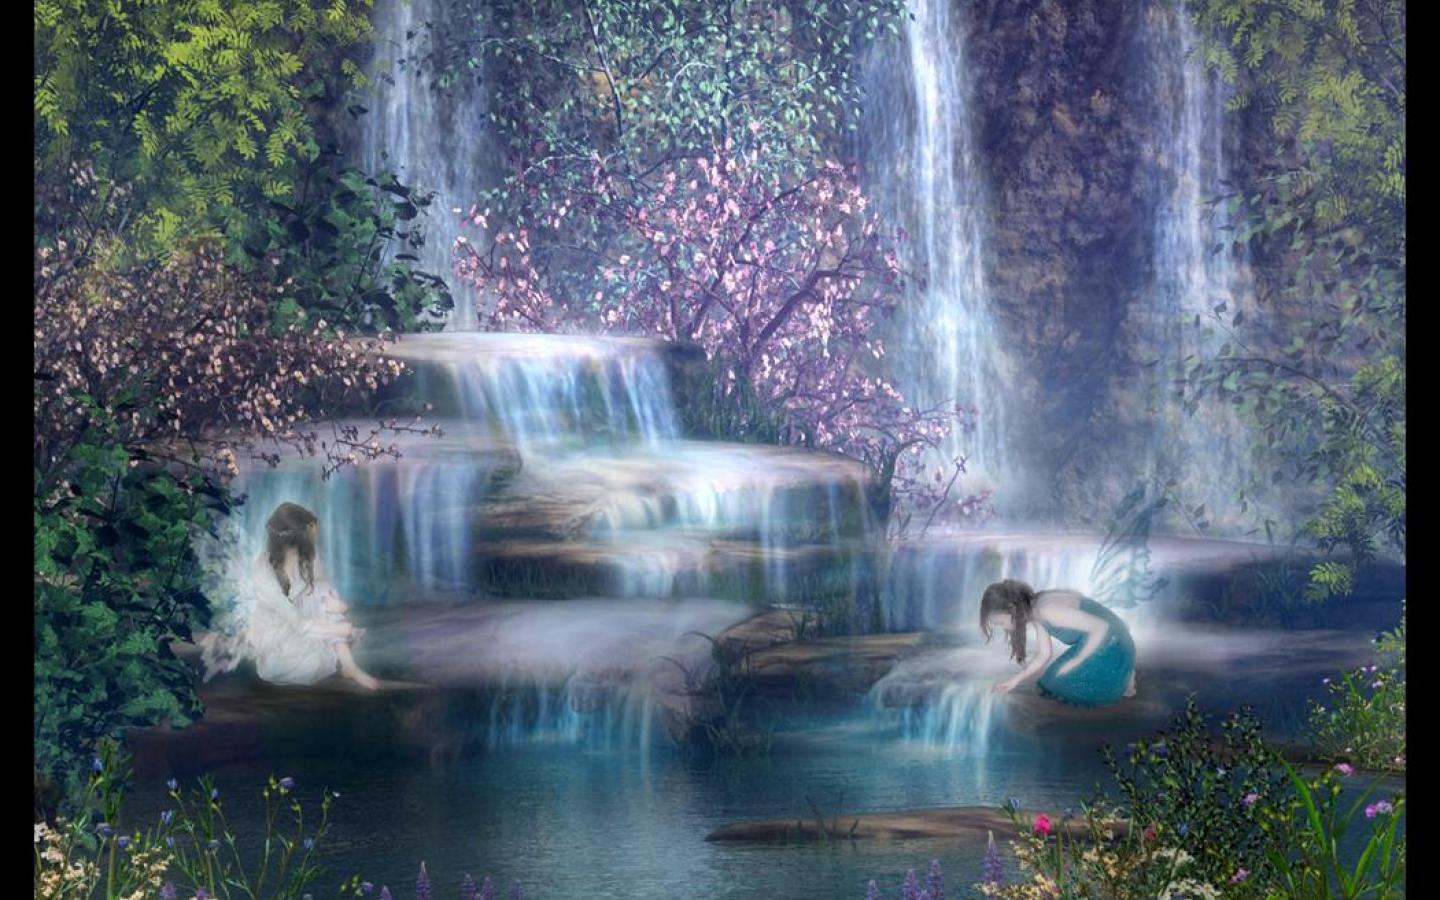 fairytale wallpaper,natural landscape,body of water,nature,waterfall,water resources